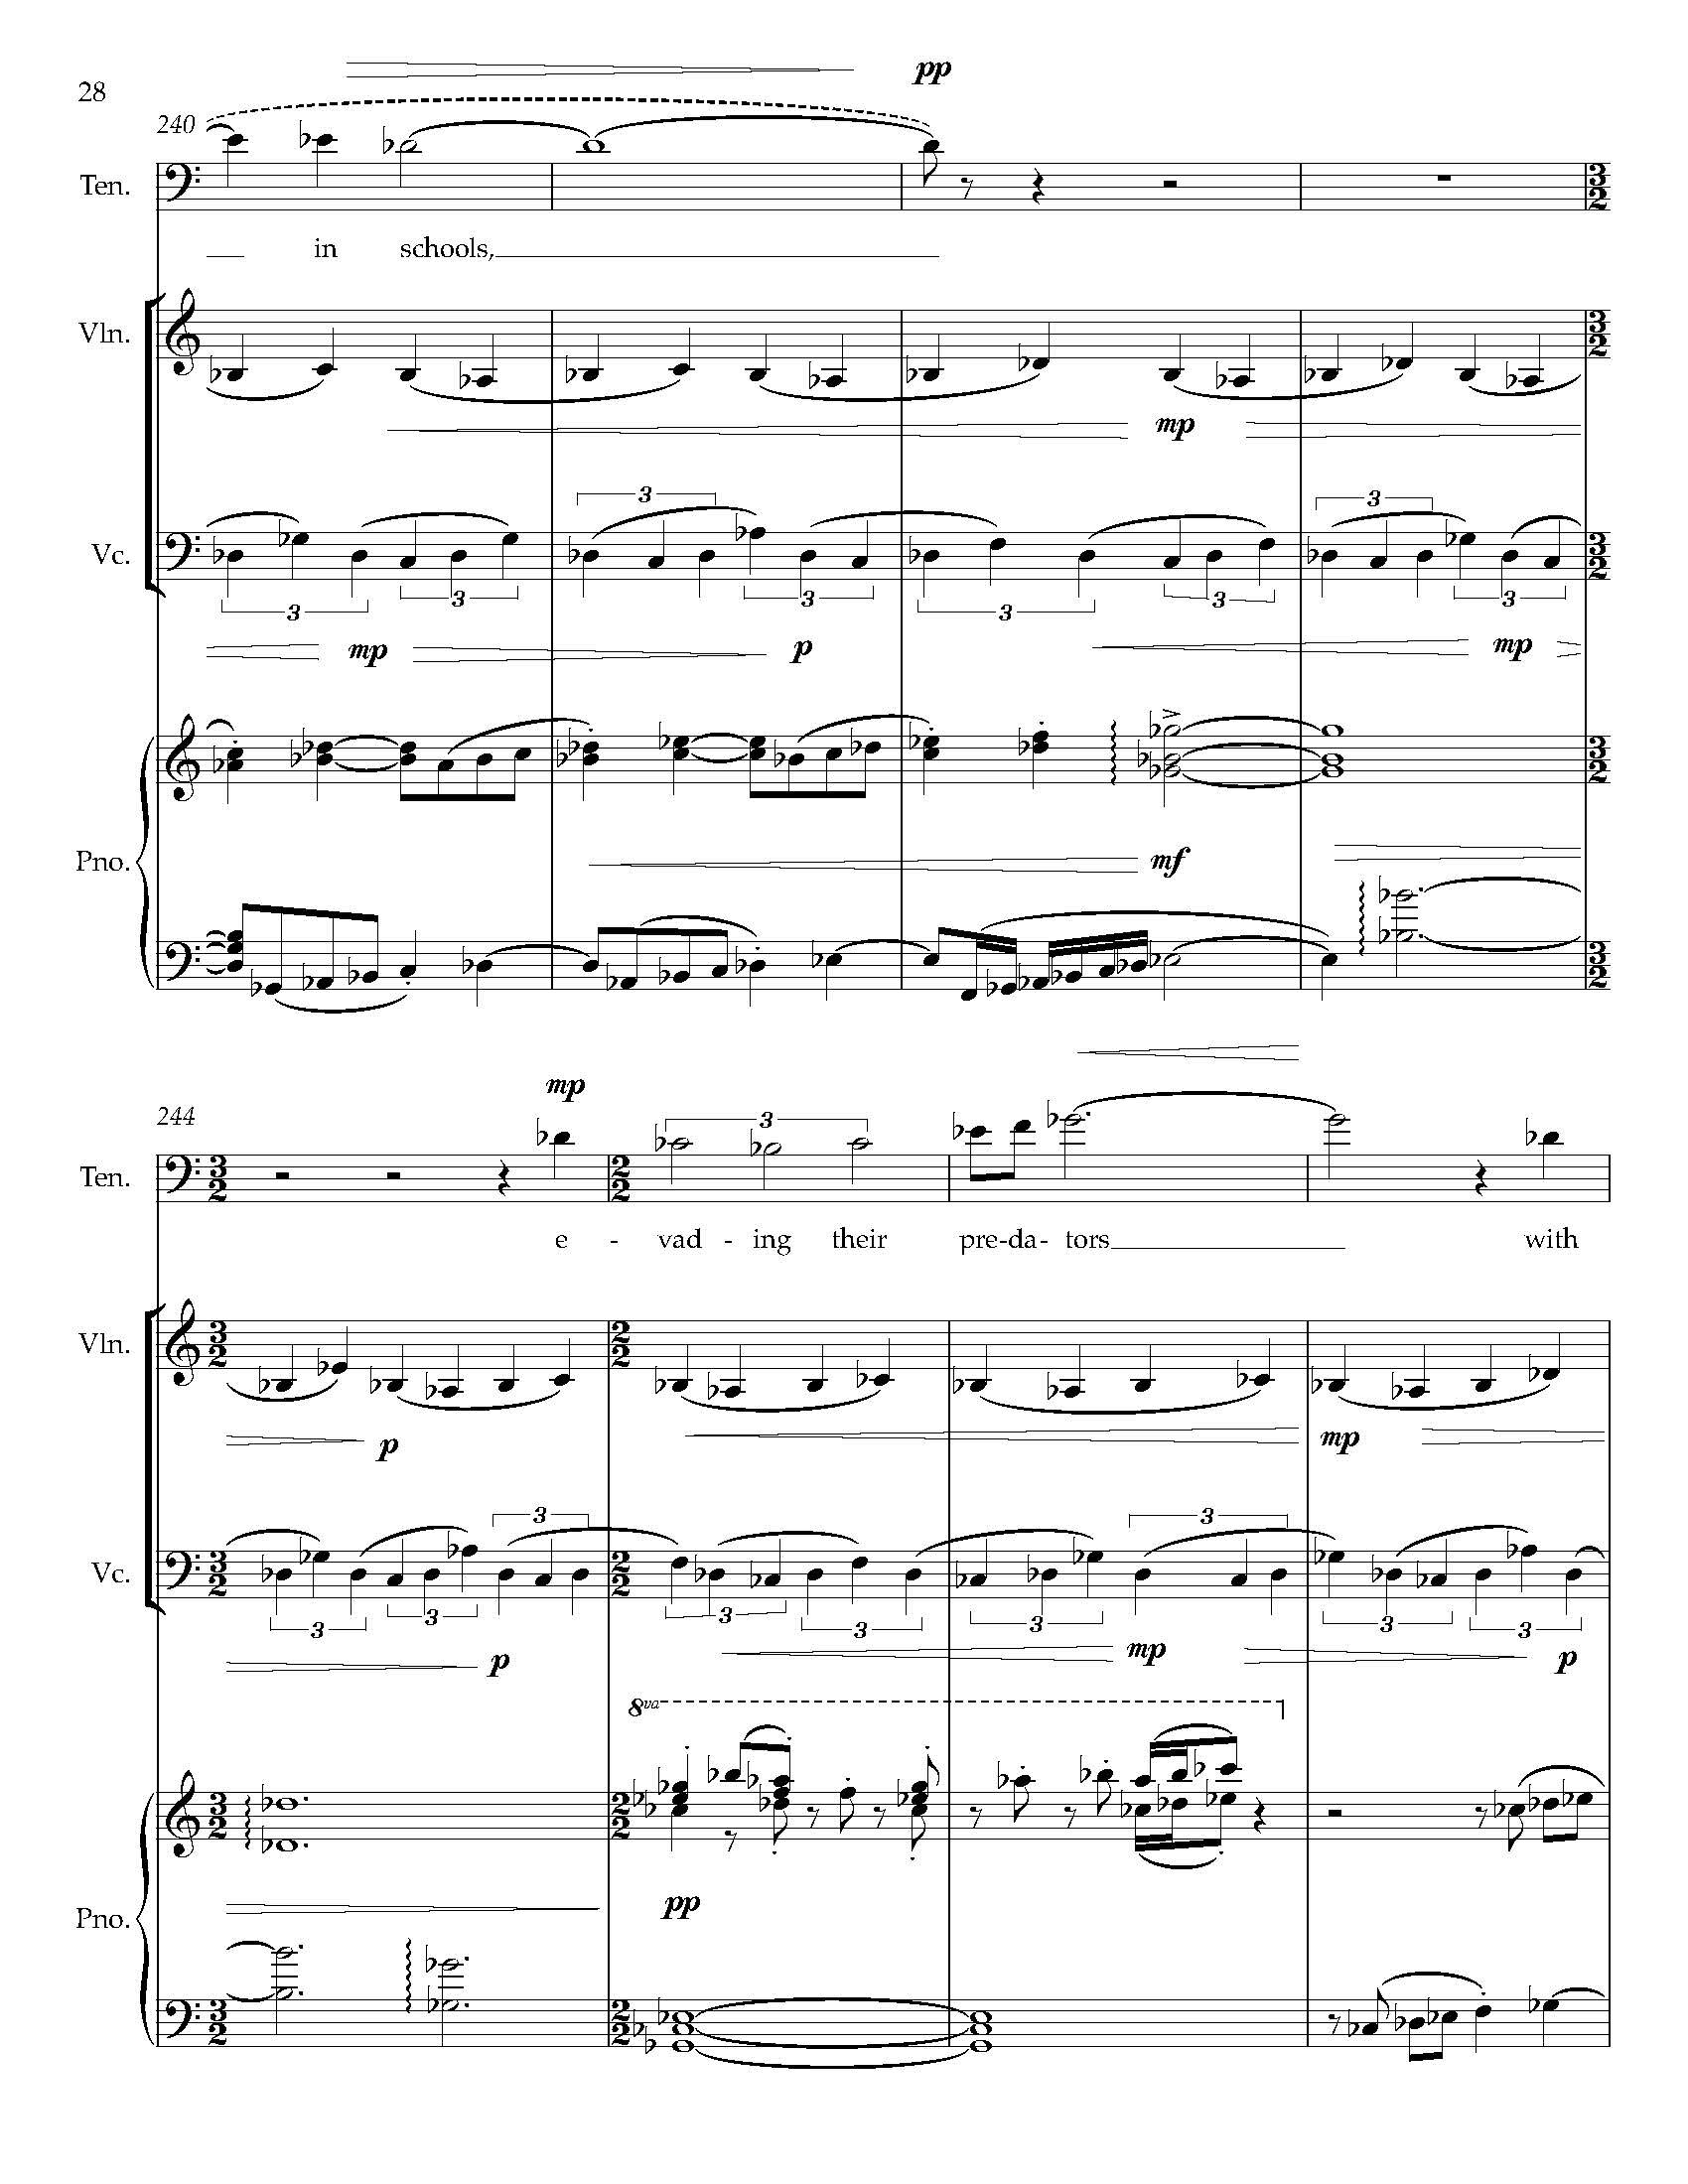 Gursky Songs - Complete Score_Page_36.jpg